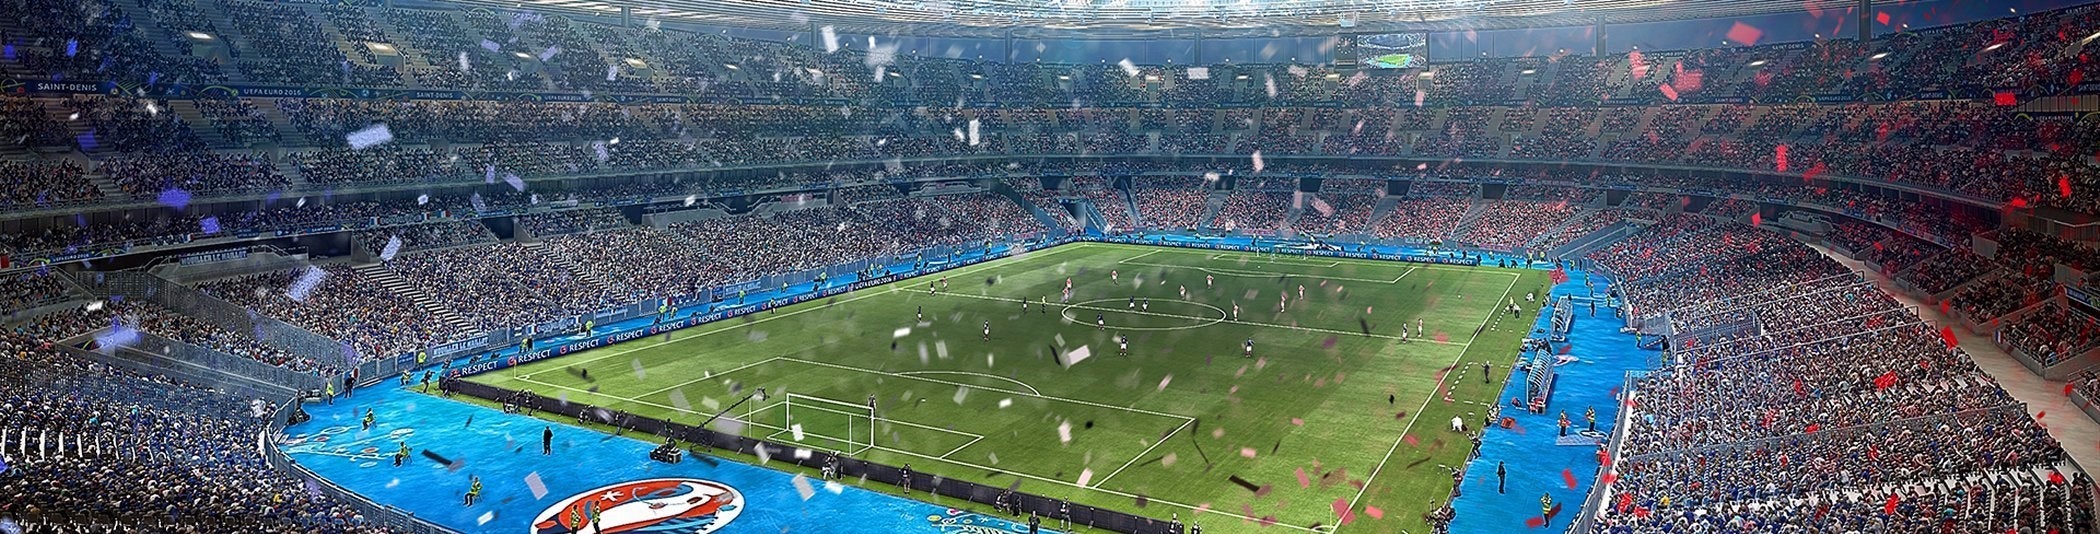 Image for PES's free Euro 2016 update is a bit of a disappointment